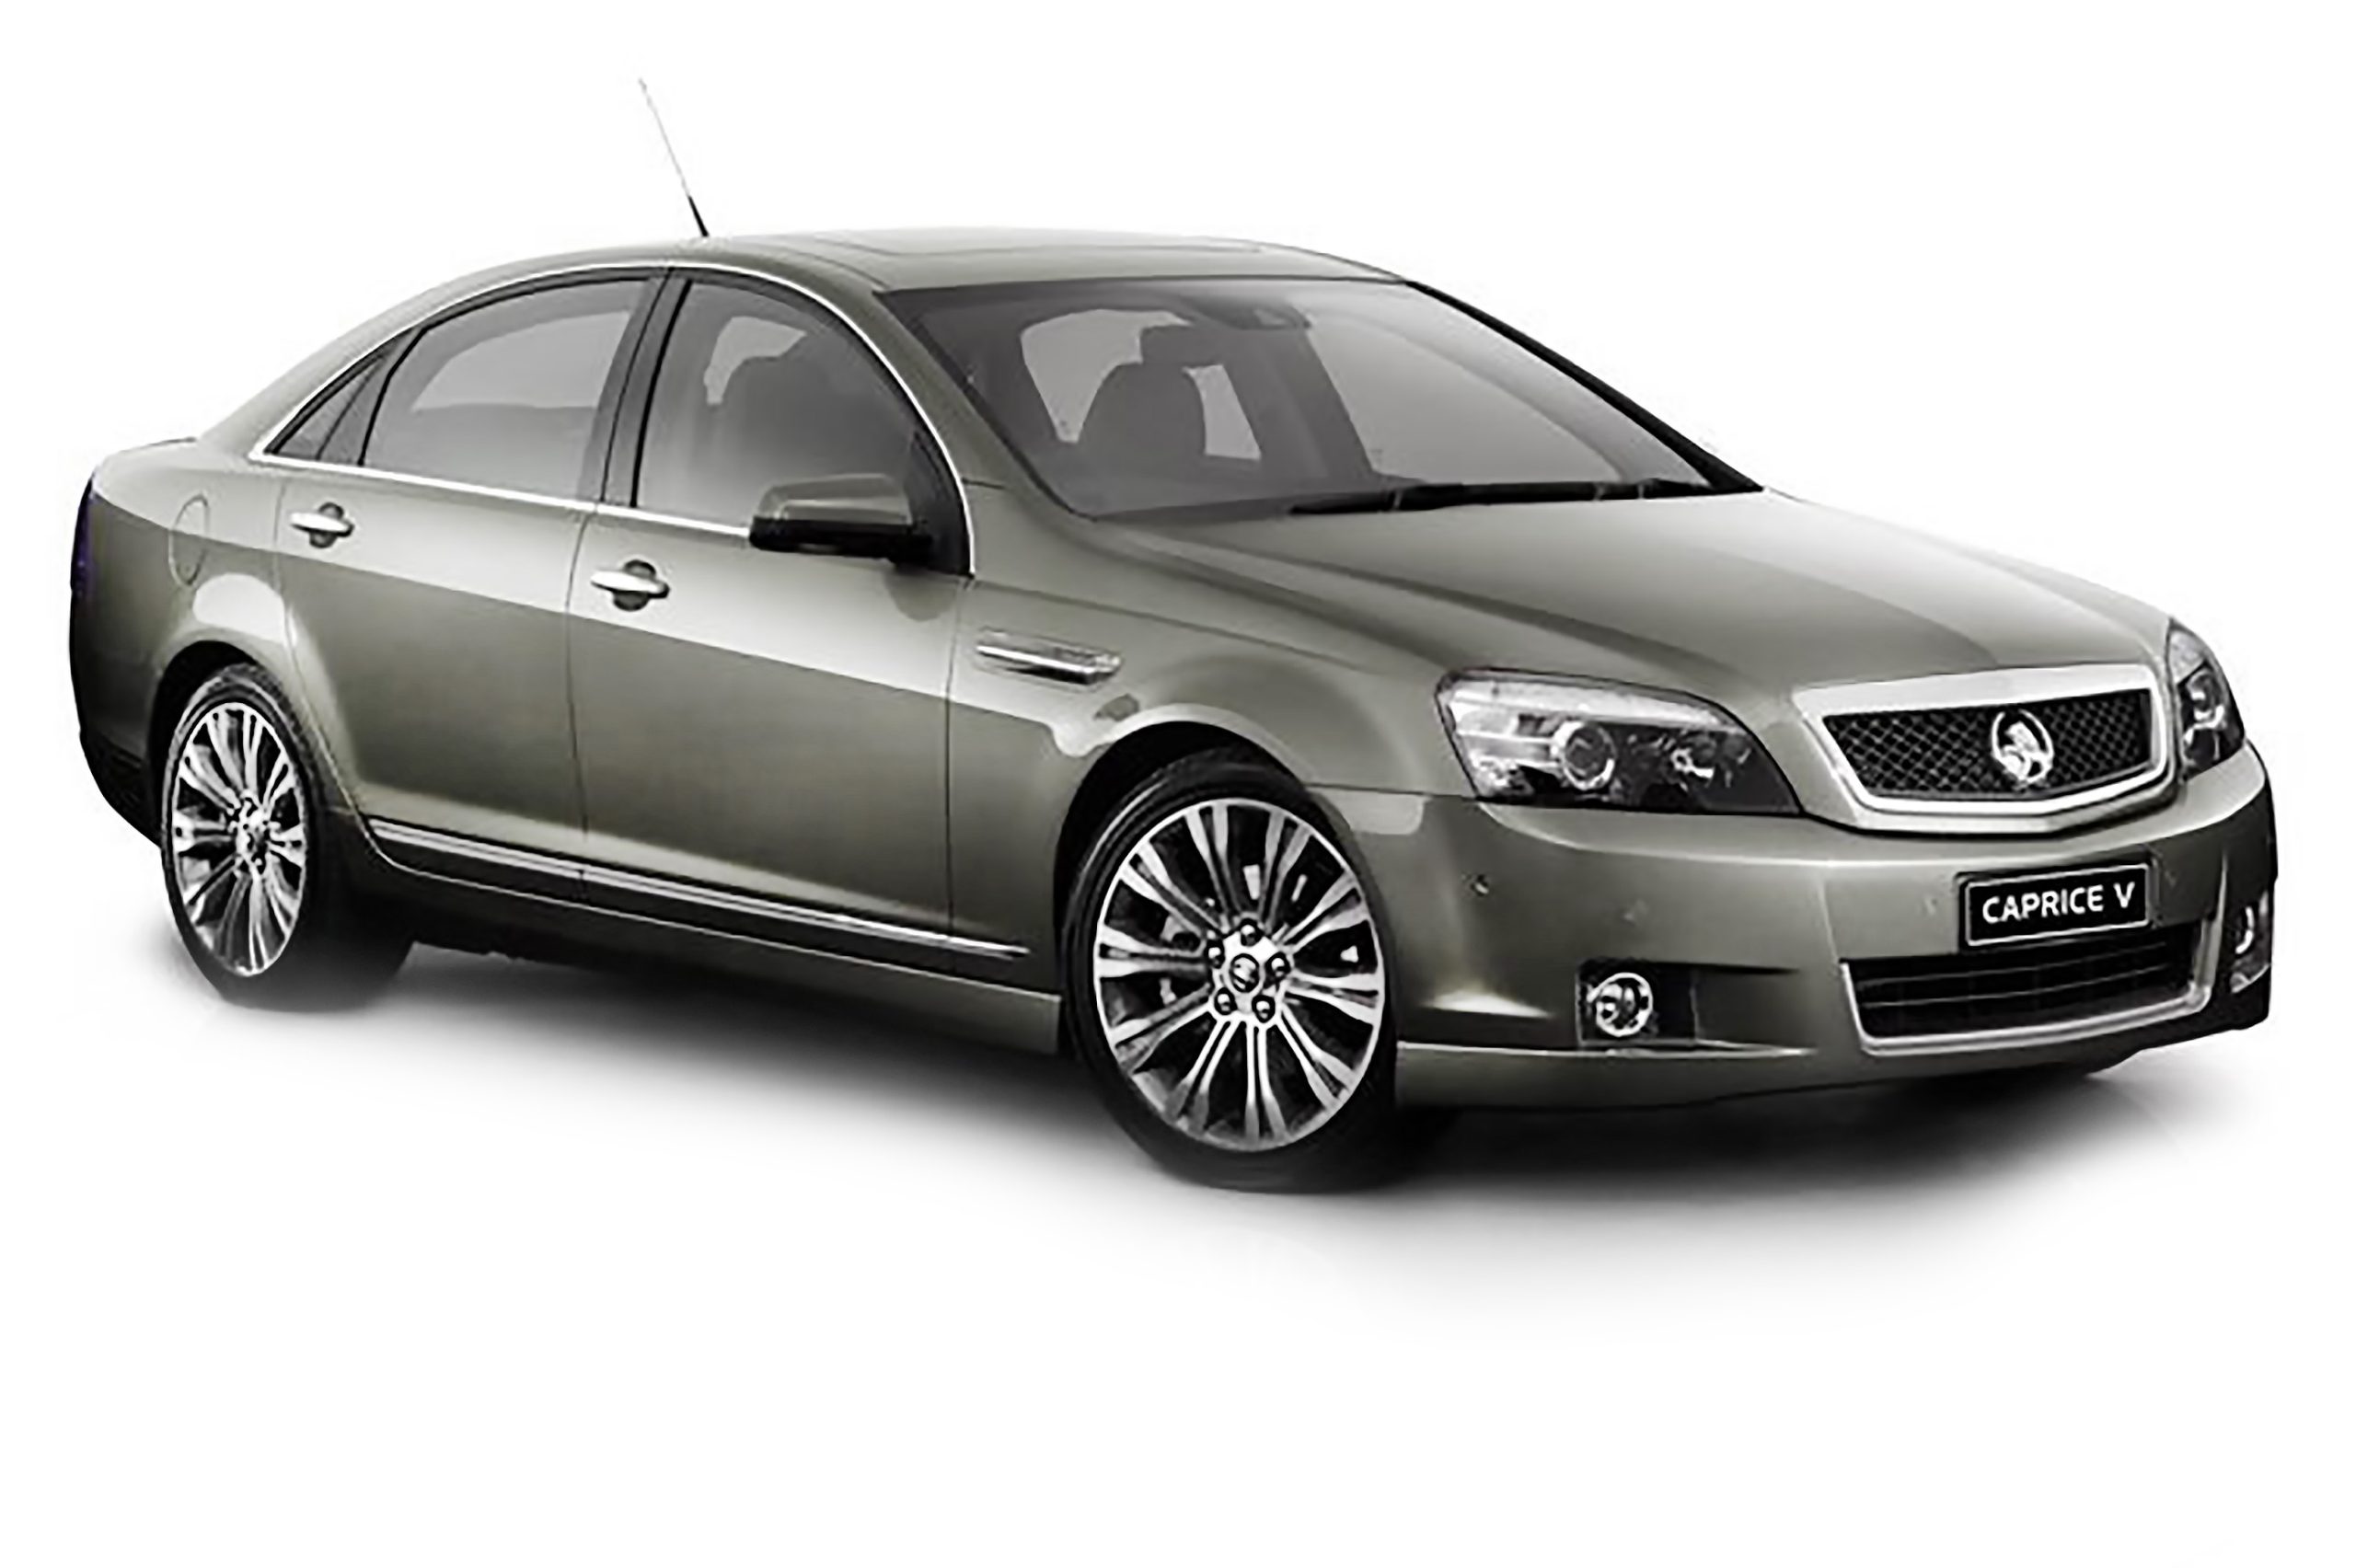 Illawarra Luxury Sedan for airport transfers, corporate transfers or any other point to point transfer service.